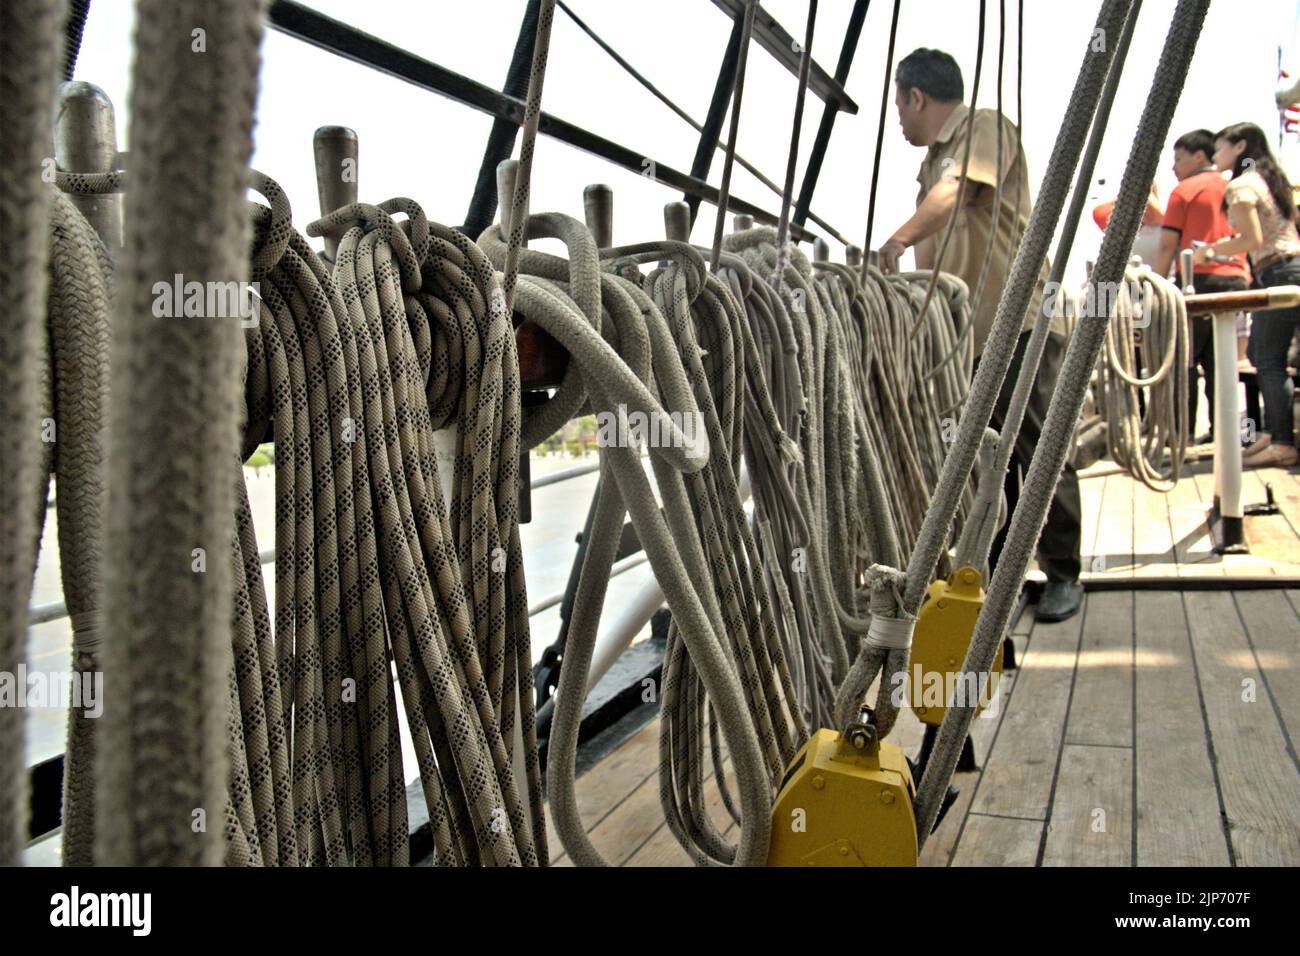 A view of boat ropes on KRI Dewaruci (Dewa Ruci), an Indonesian tall ship, as the barquentine type schooner is opened for public visitors at Kolinlamil harbour (Navy harbour) in Tanjung Priok, North Jakarta, Jakarta, Indonesia. Stock Photo